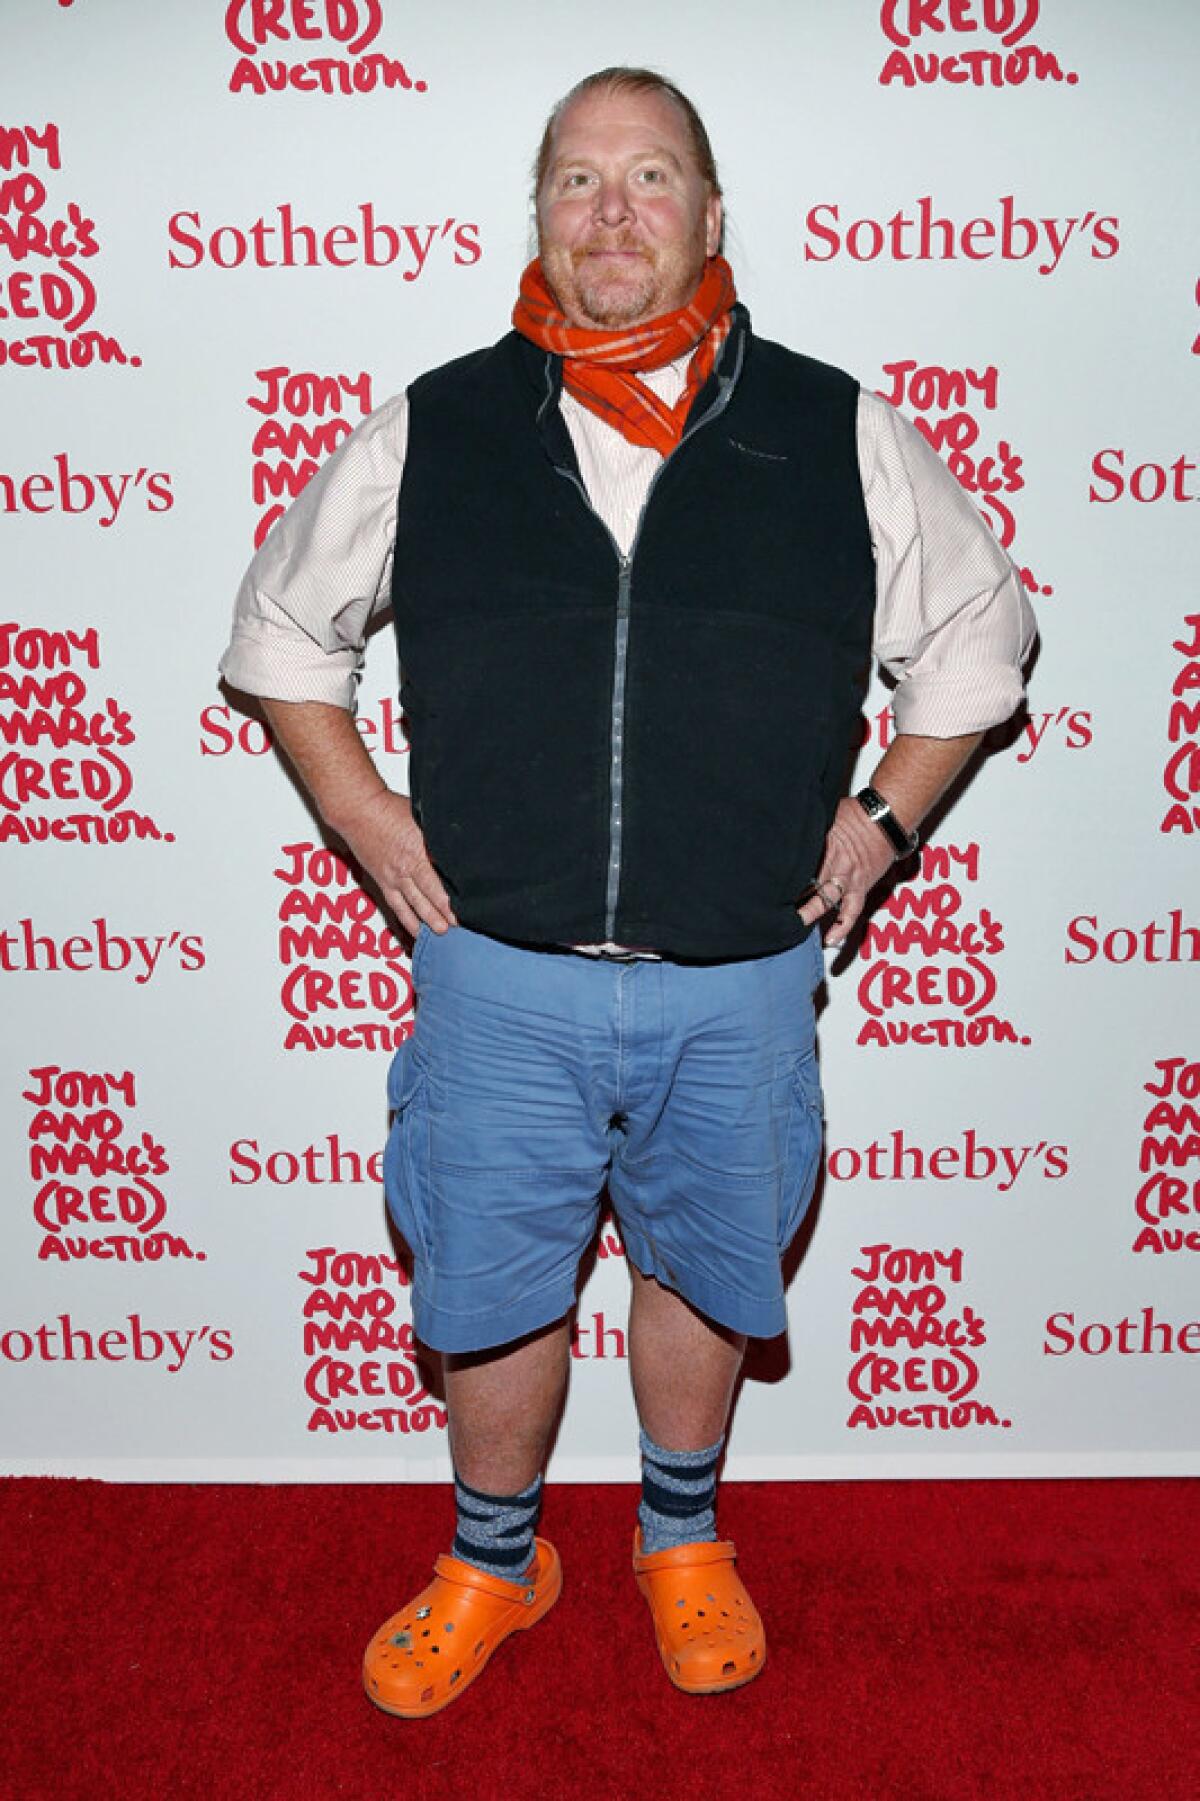 Chef Mario Batali, wearing his trademark orange Crocs, attends Jony and Marc's (RED) Auction at Sotheby's on Saturday in New York City.